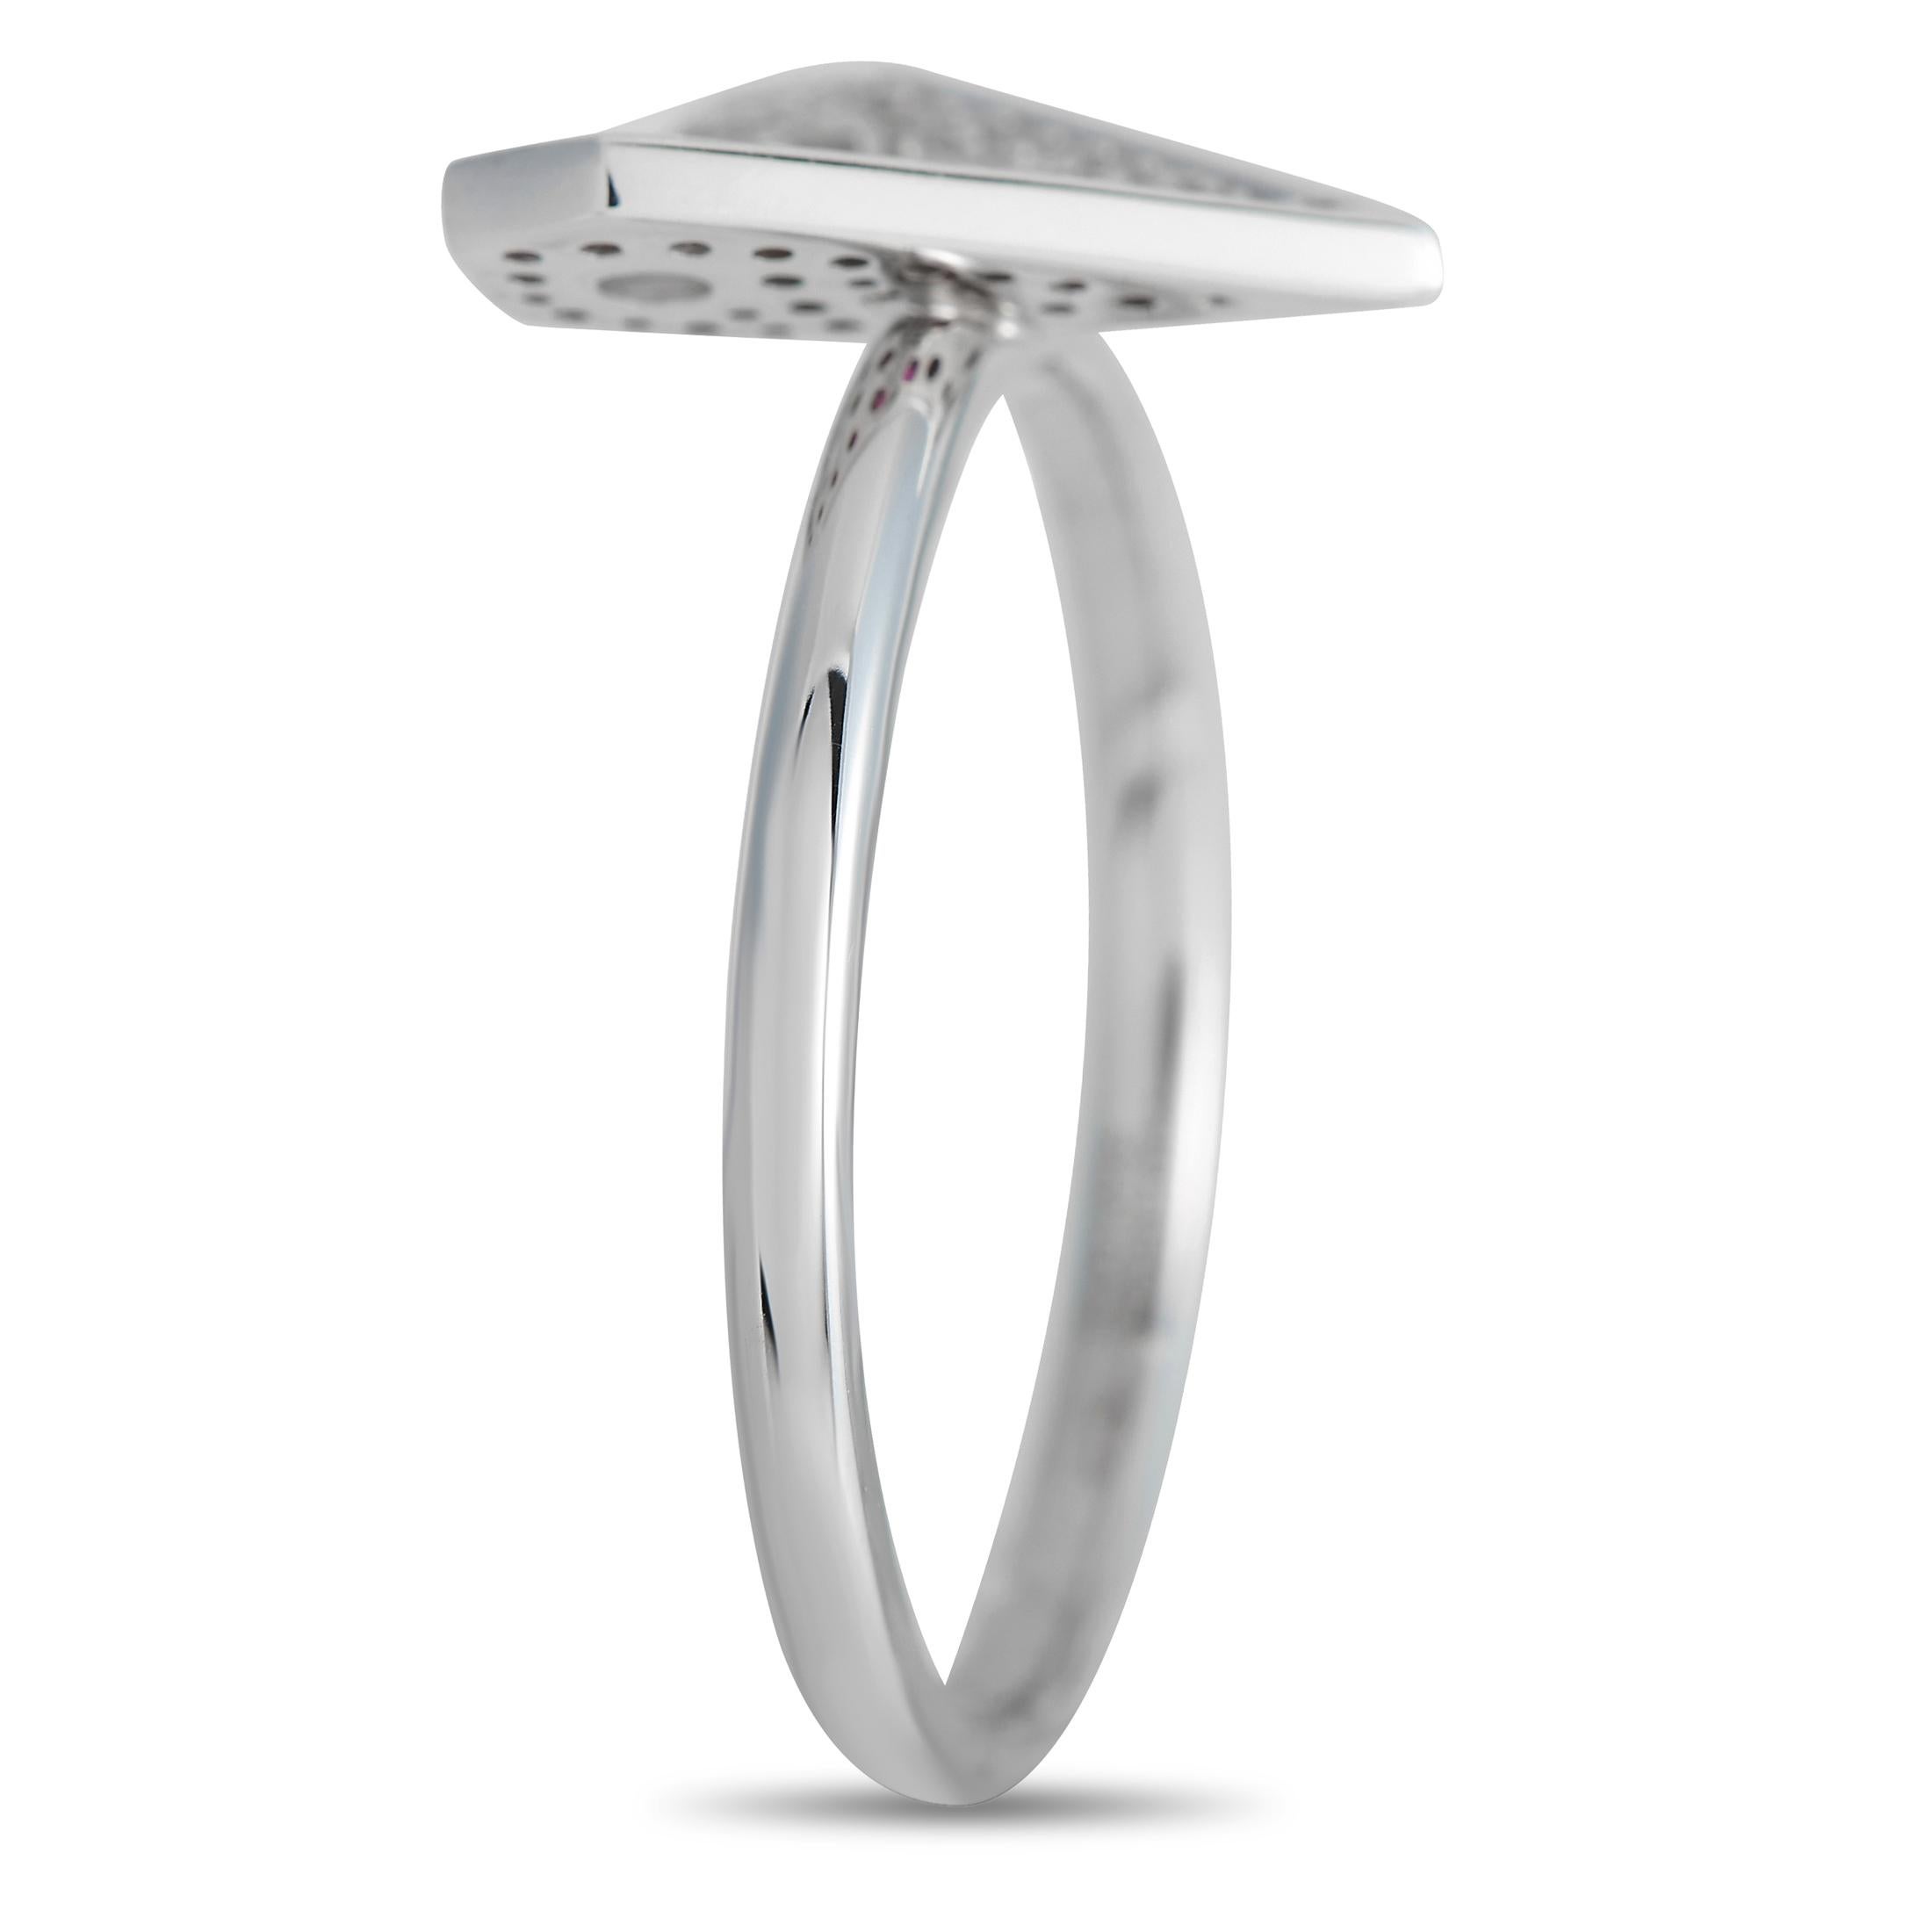 Show appreciation to someone who has filled a whole in your heart by giving this chic geometric ring as a special gift. The ring features a 14K white gold band topped with a two-holed, two-faced 2D heart centerpiece. One side of the heart is